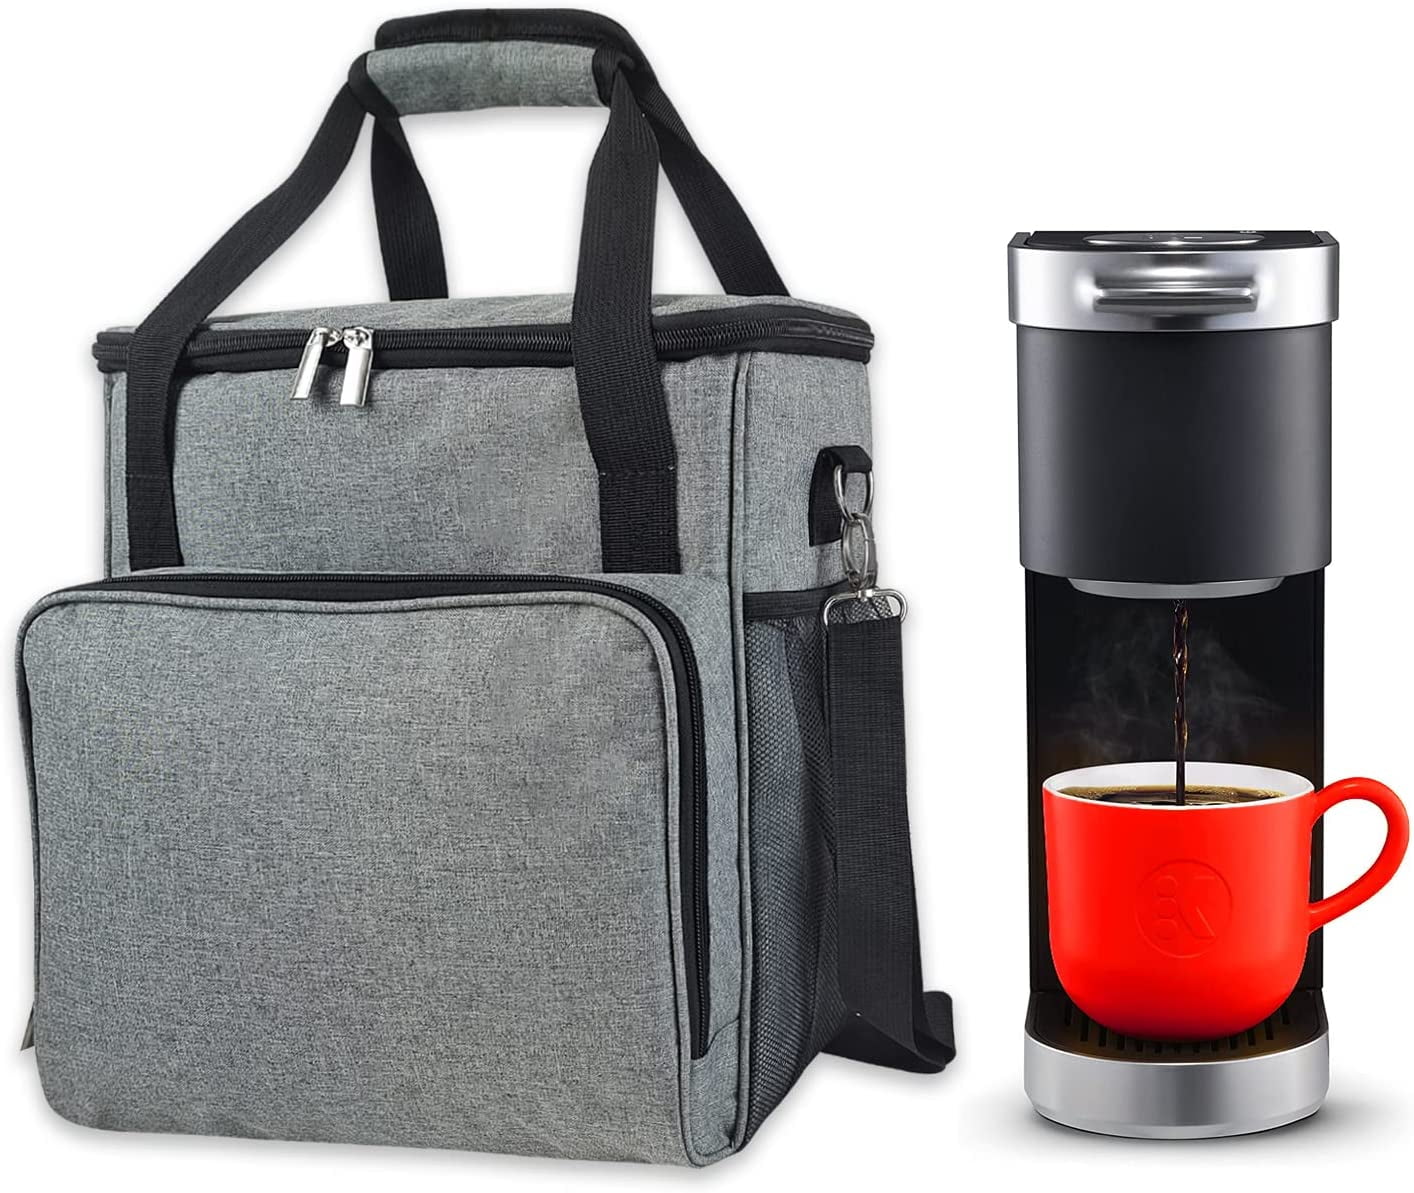 BAGSPRITE Coffee Maker Travel Bag Compatible with Keurig K-Mini or K-Mini  Plus, Single Serve Coffee Brewer Carrying Case with Multiple Pockets for